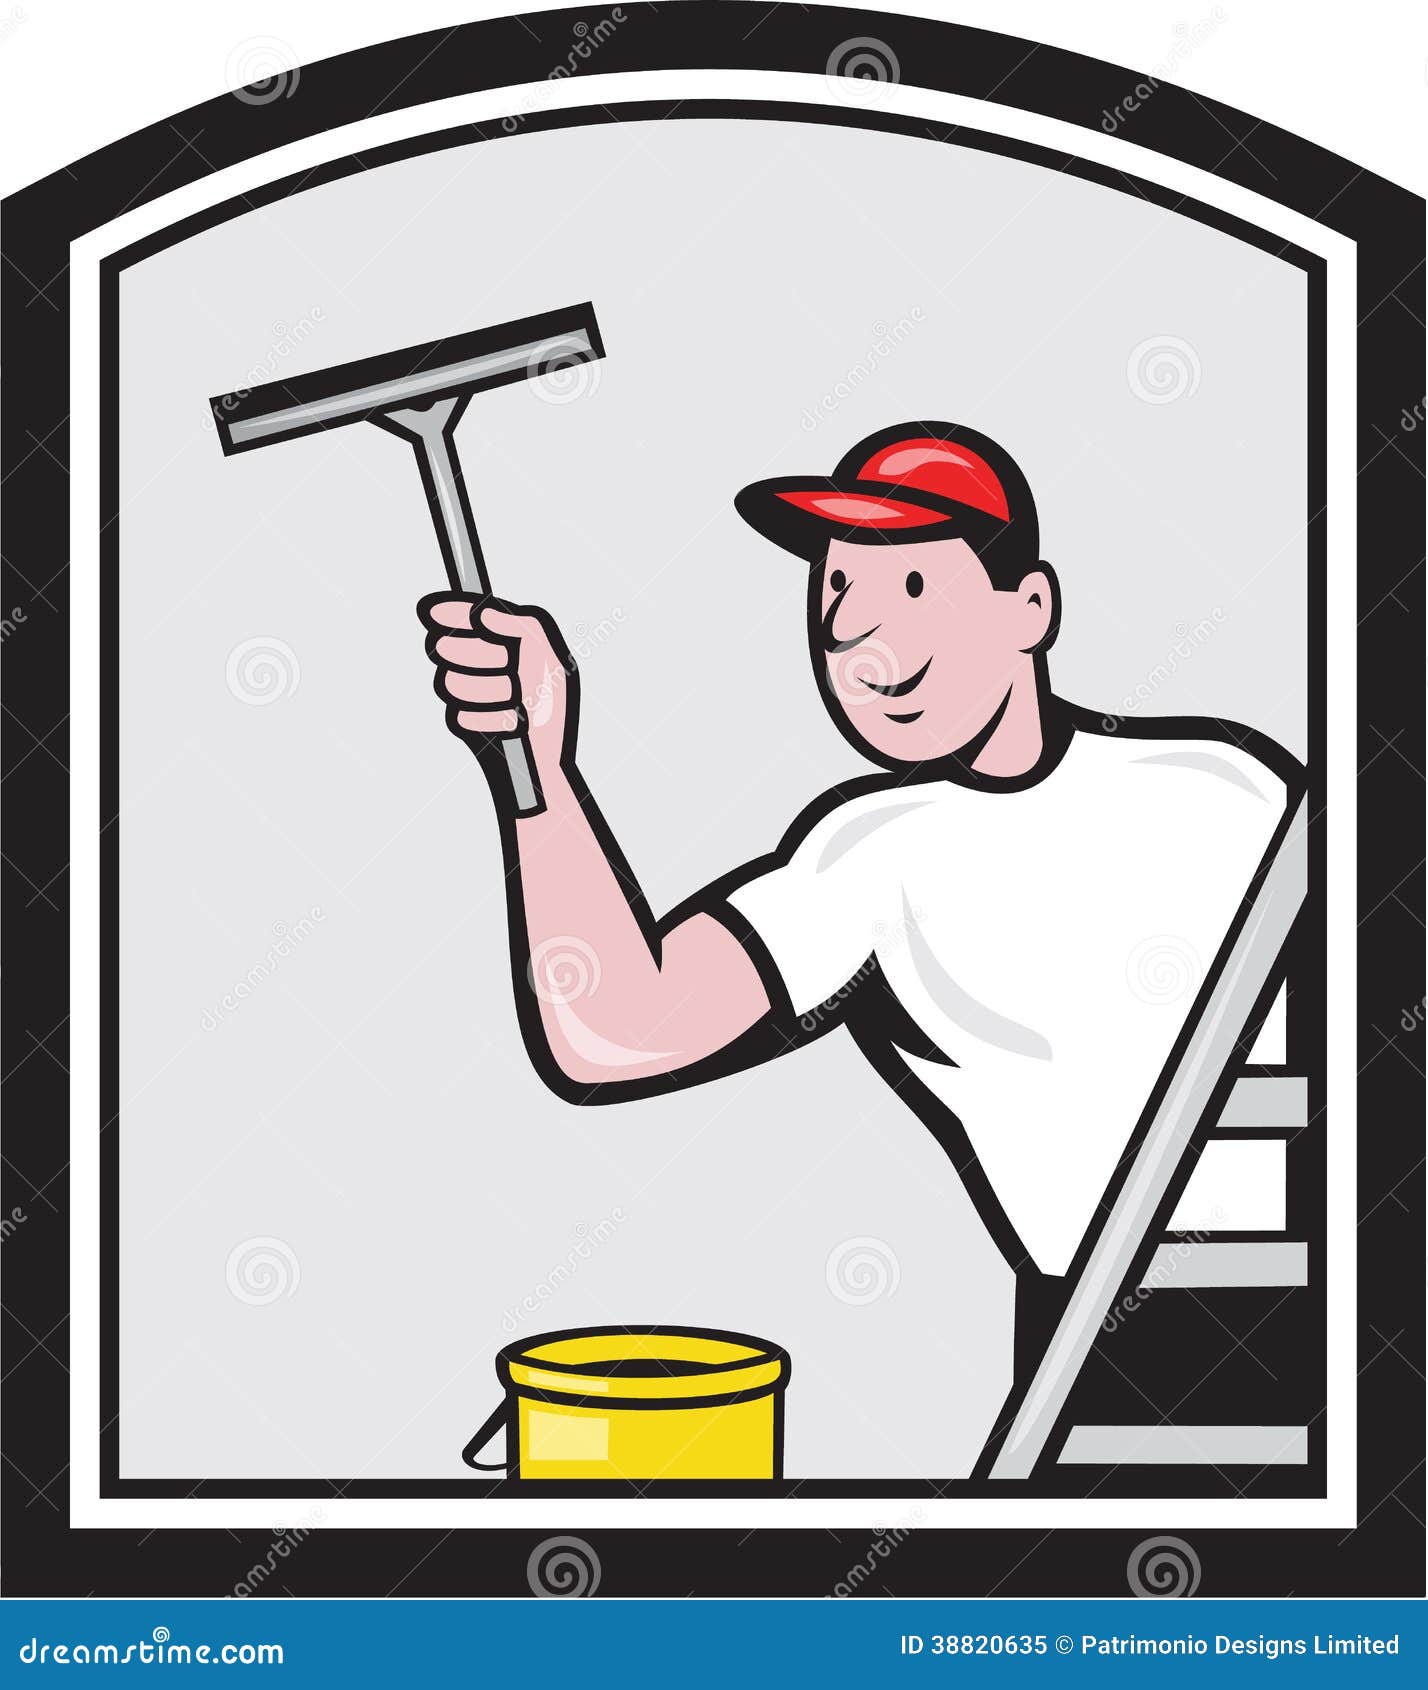 window squeegee clipart - photo #30